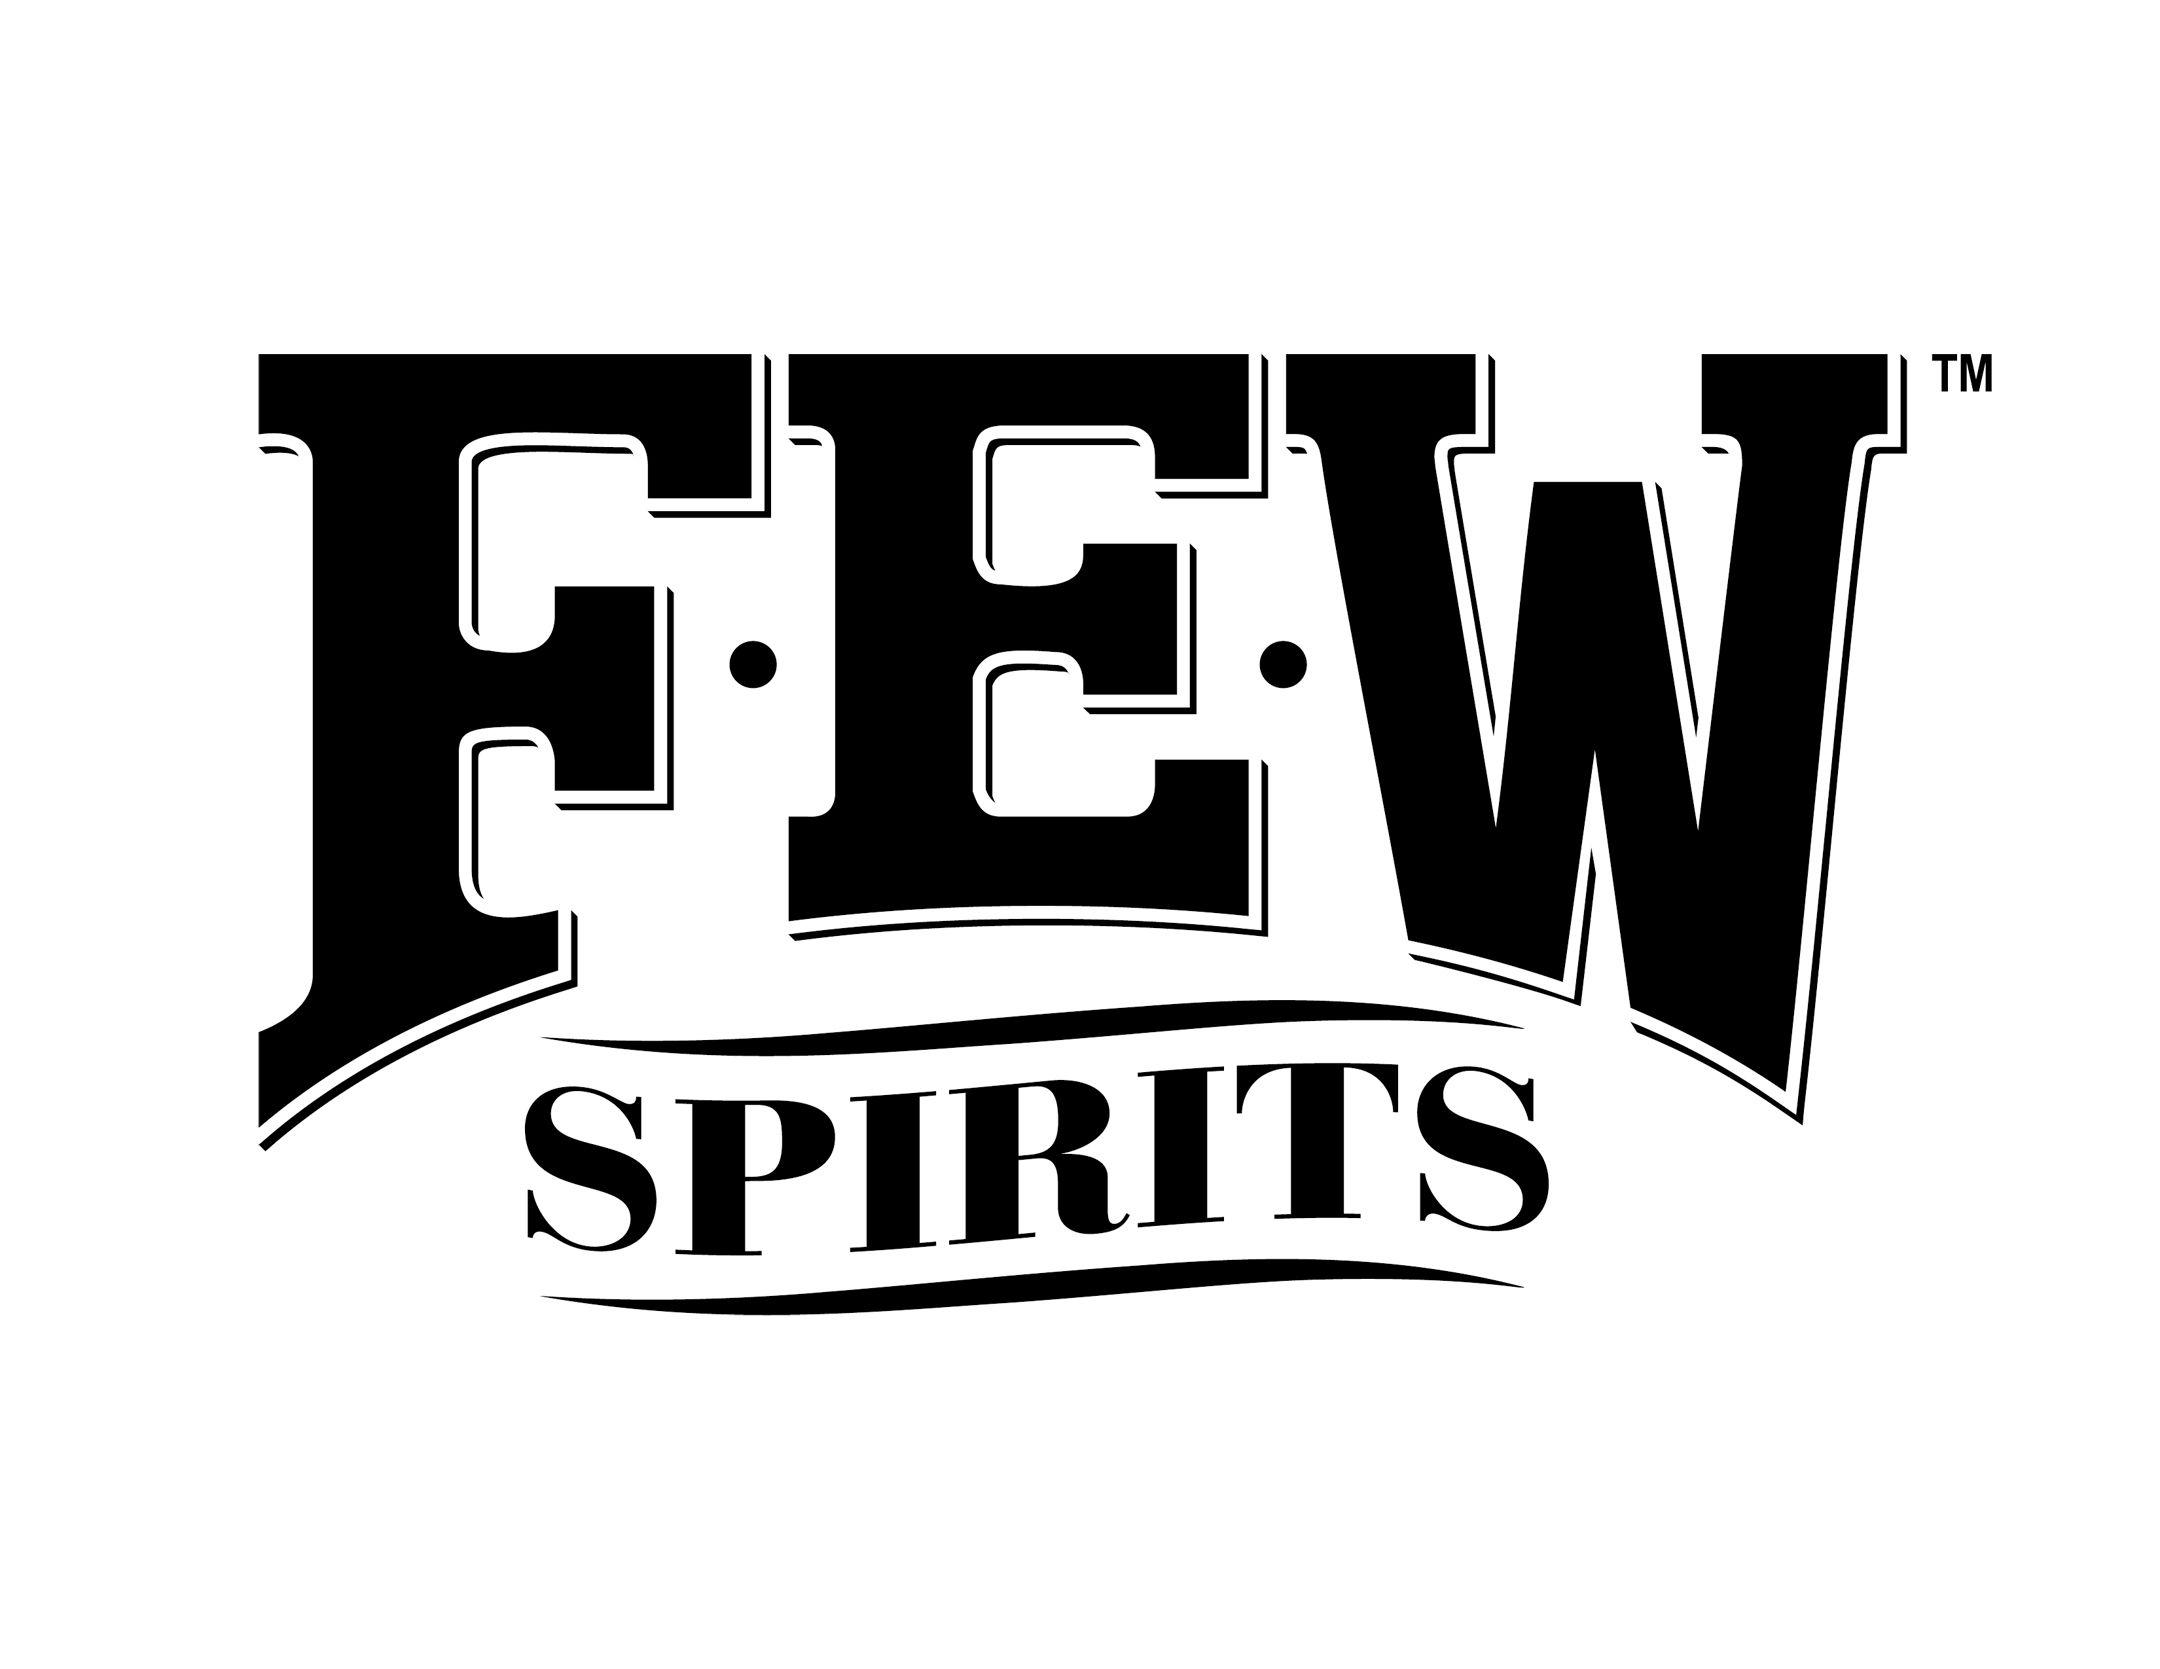 Few Logo - FEW Spirits: Contradictions Result in Excellence. Booze Business: A